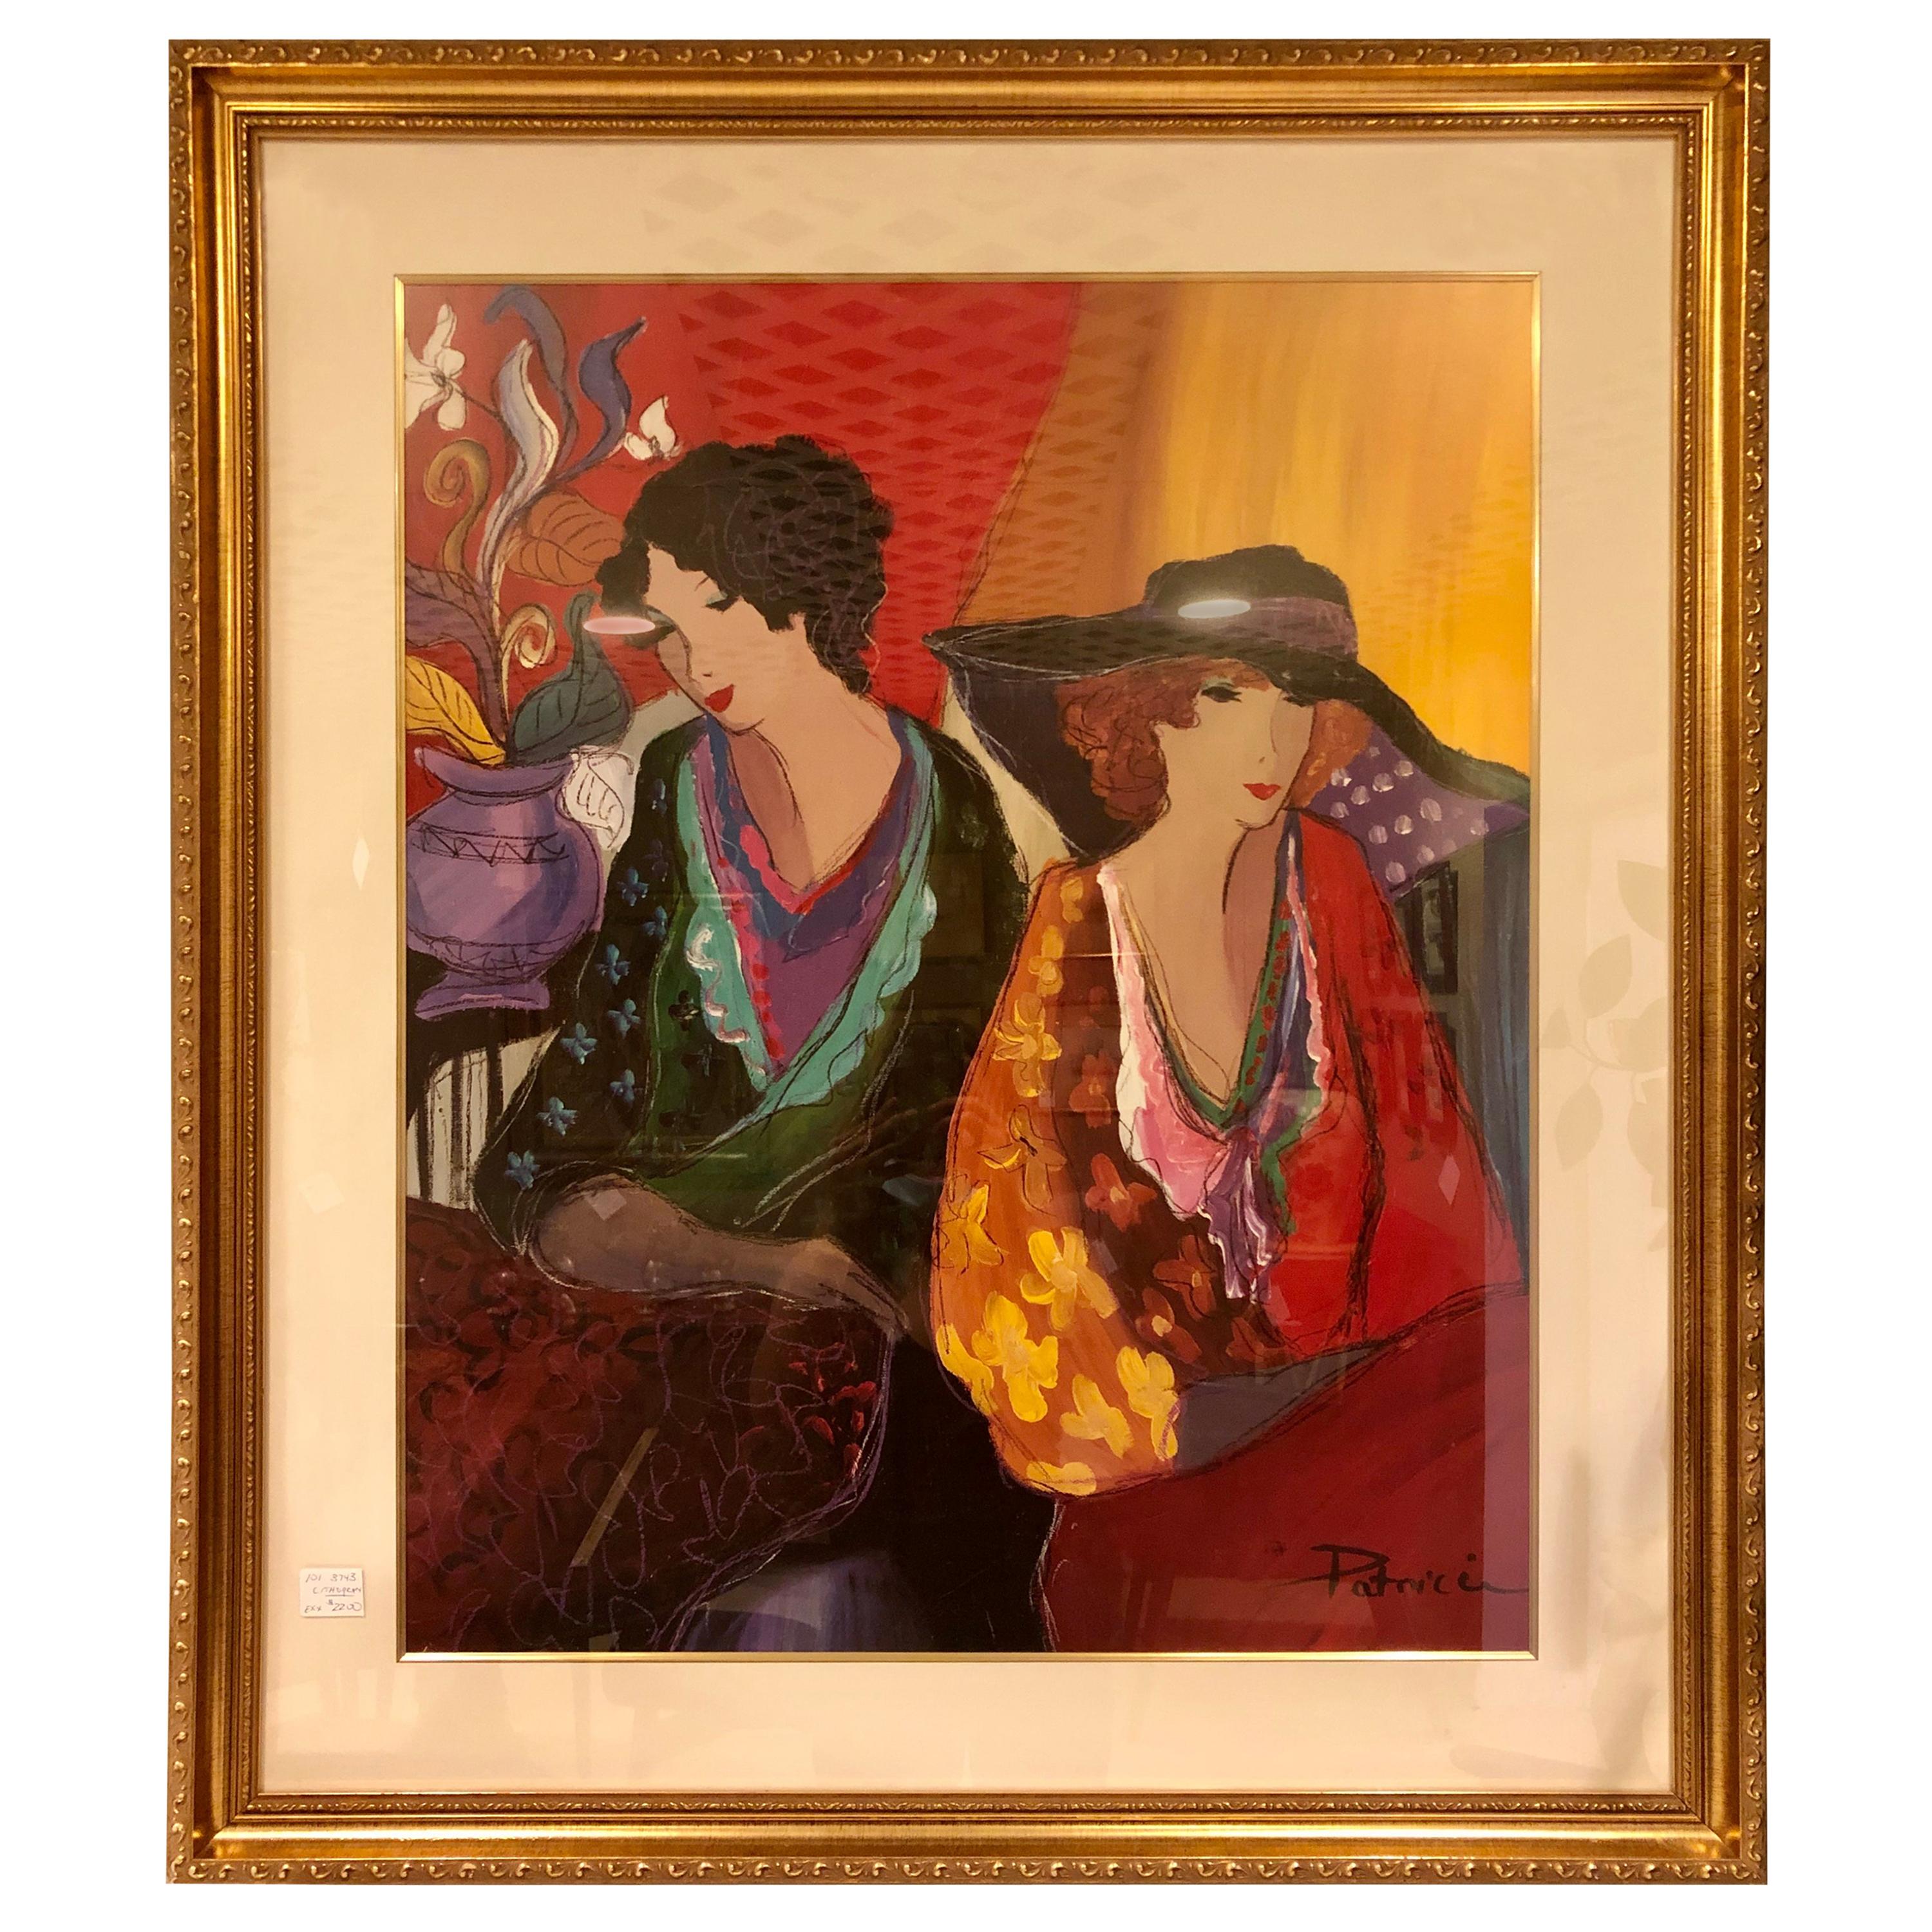 Lithograph by Patricia Govezensky of Two Woman Gilt Framed Signed